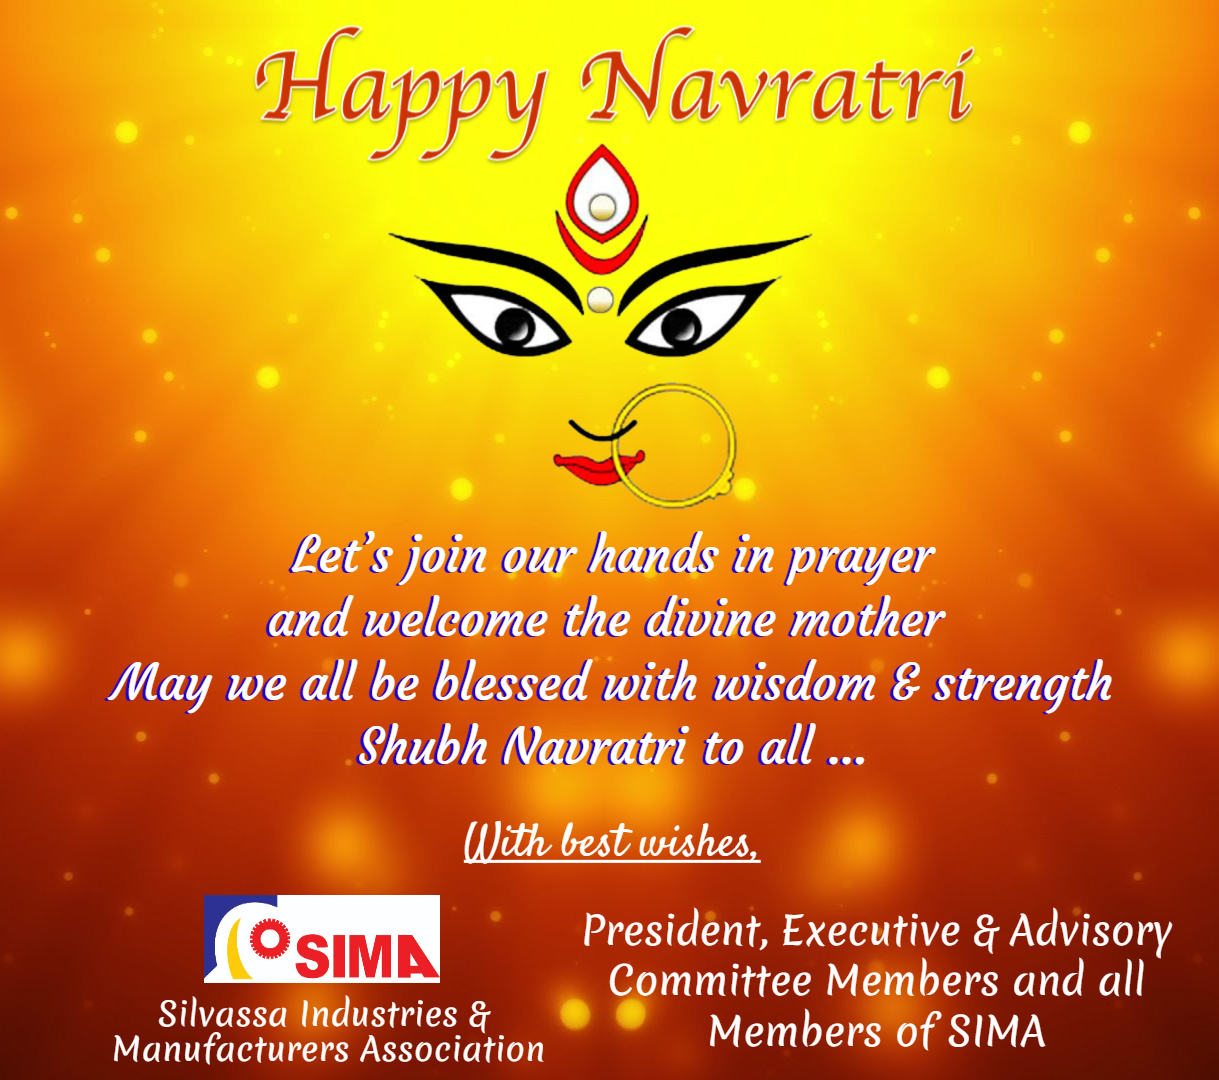 Wishing you and your family Happy Navratri..